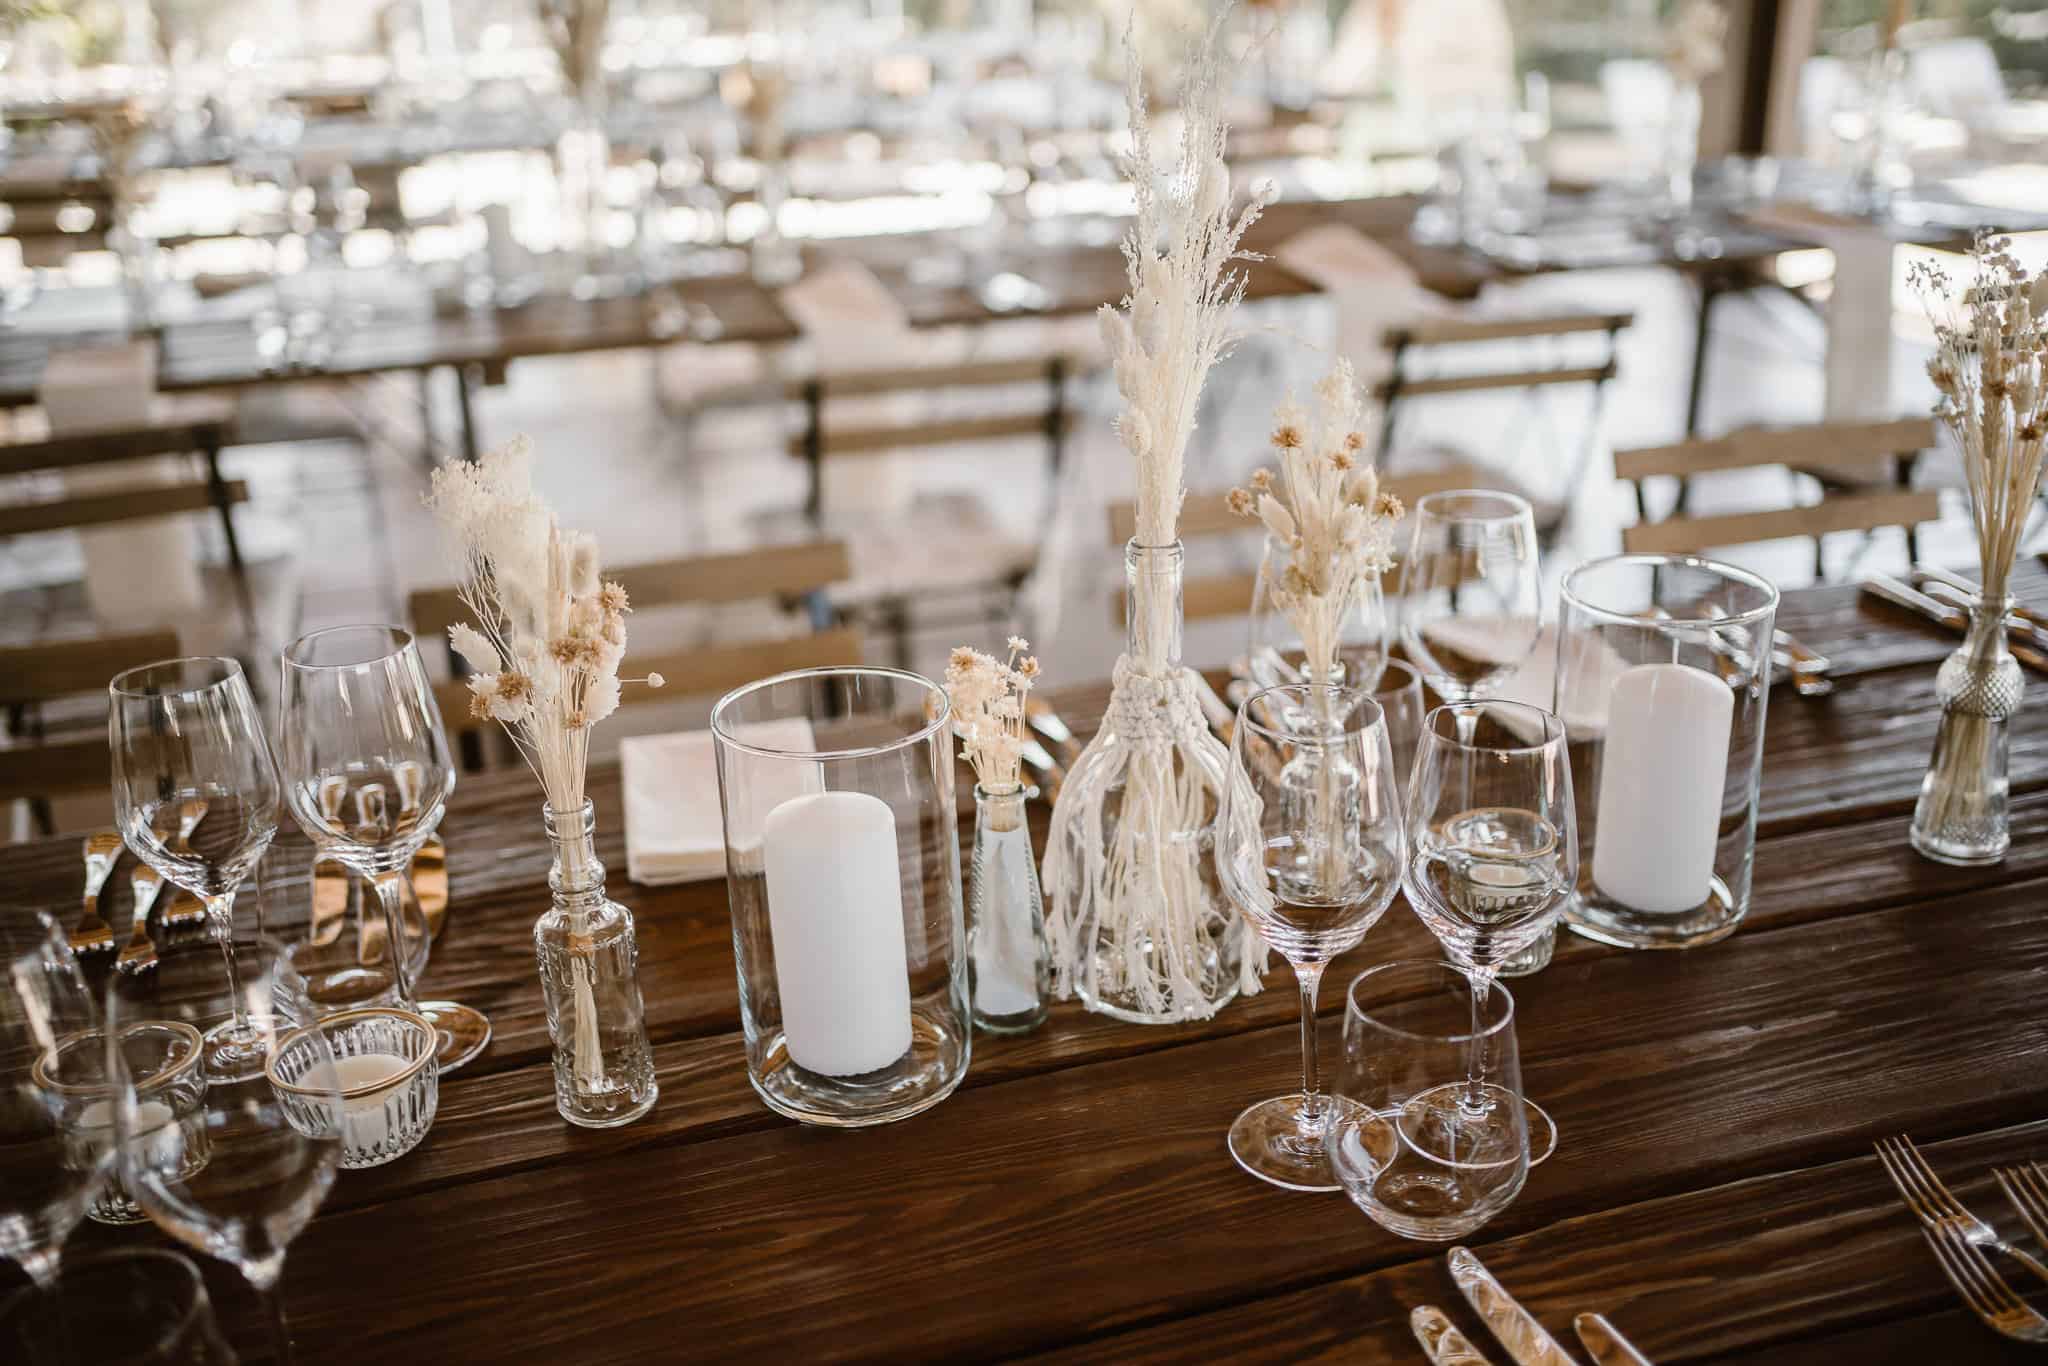 Boho centerpieces for a rustic wedding in Italy.